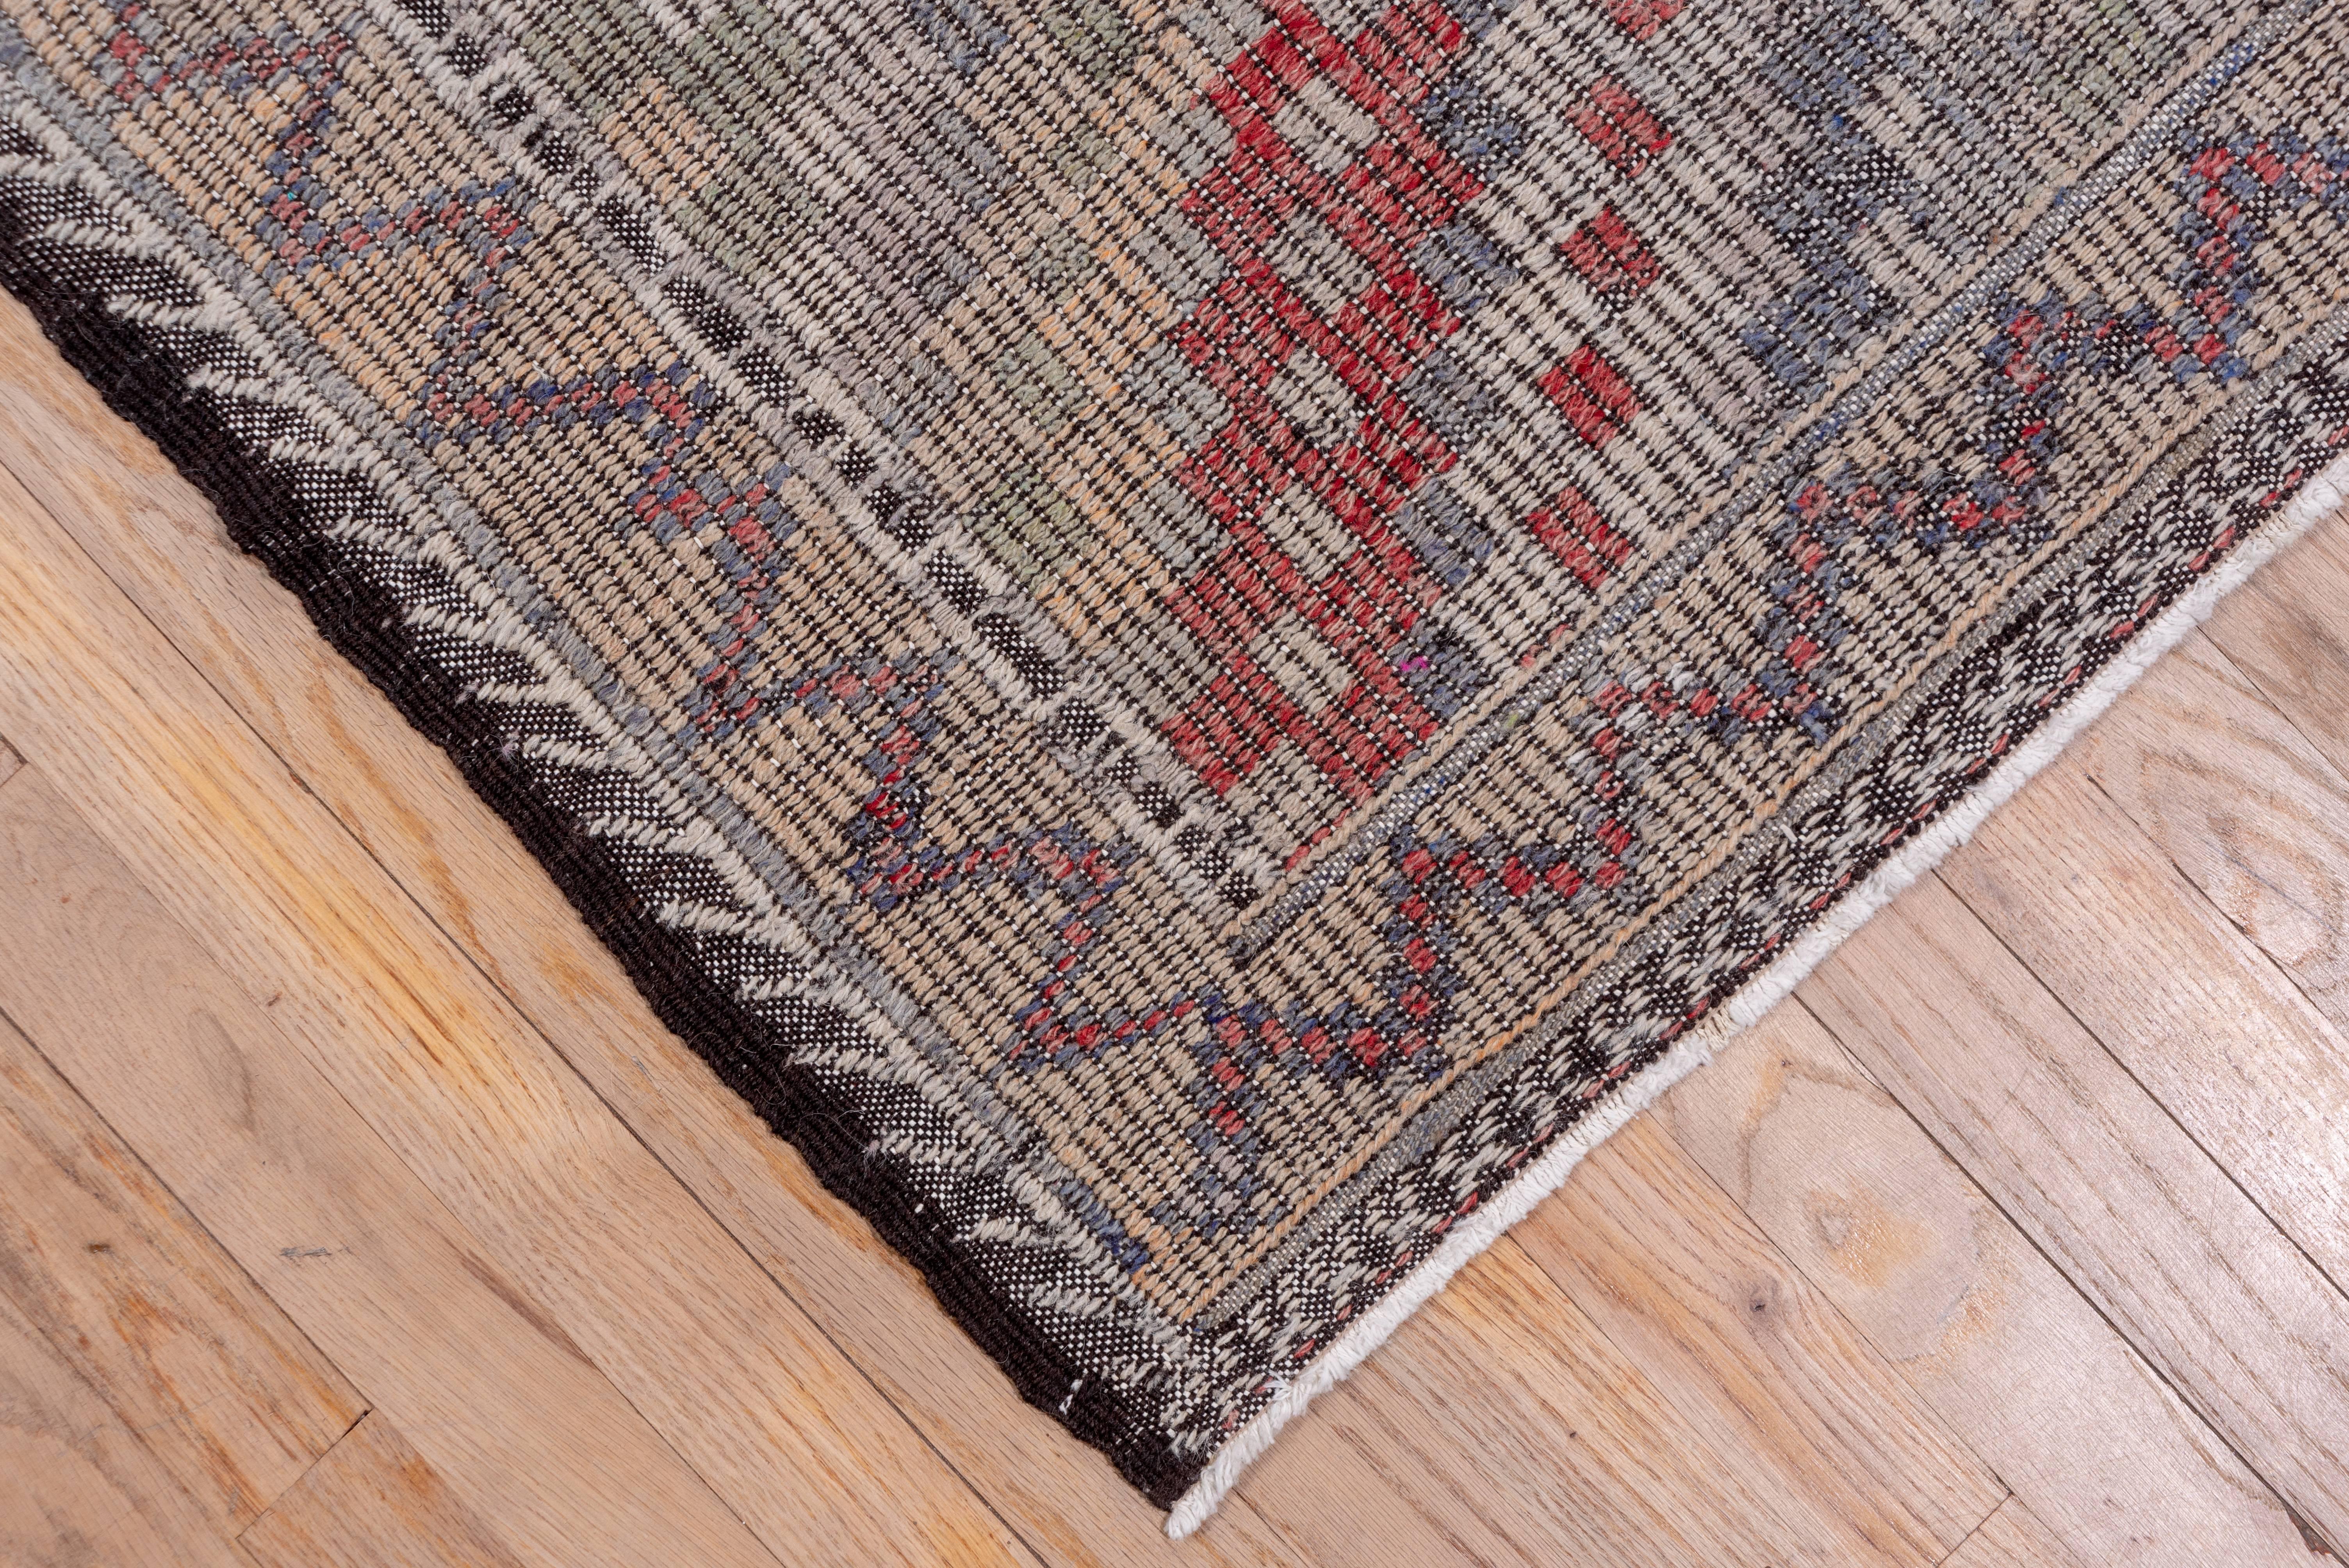 A bold stepped and nested  lozenge lattice pattern in which the diagonals  are composed  of small colored squares  decorates this softly toned eastern Turkish flat weave in the weft float technique on a dark brown ground fabric. The condition is